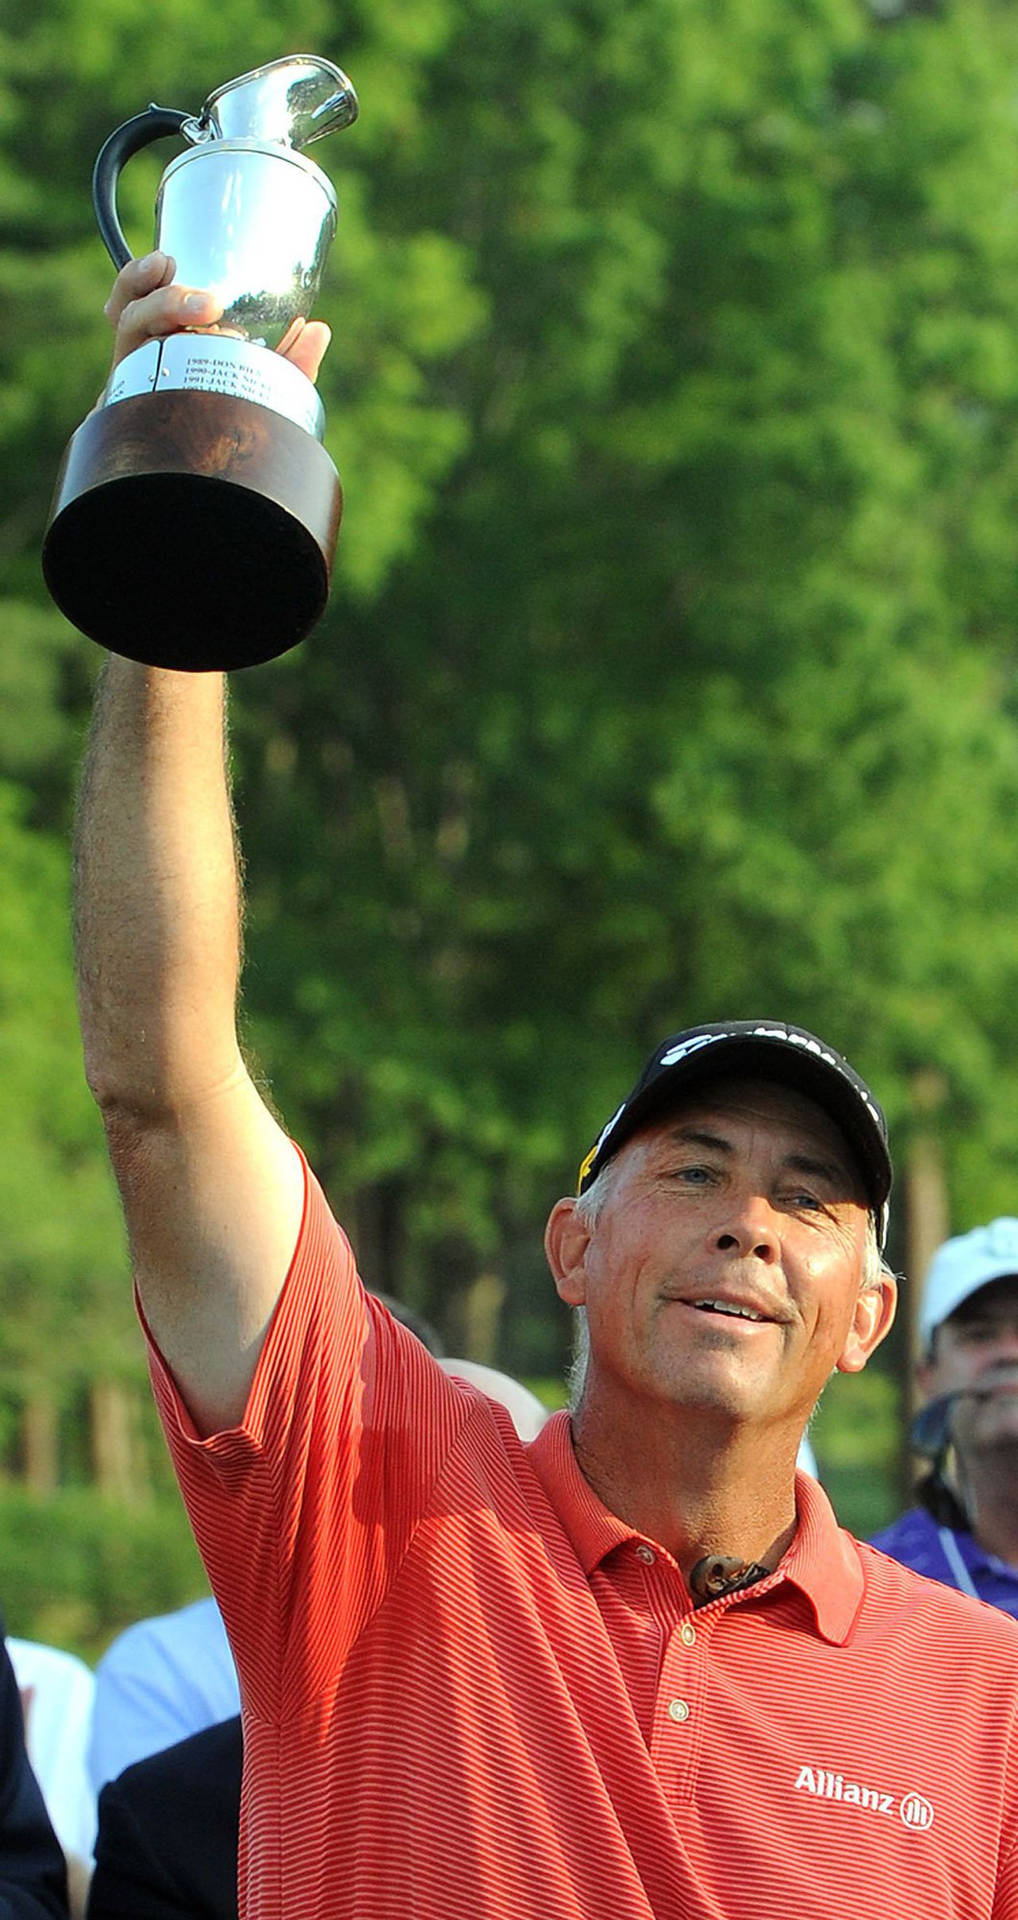 Professional golfer Tom Lehman victorious with trophy overhead Wallpaper